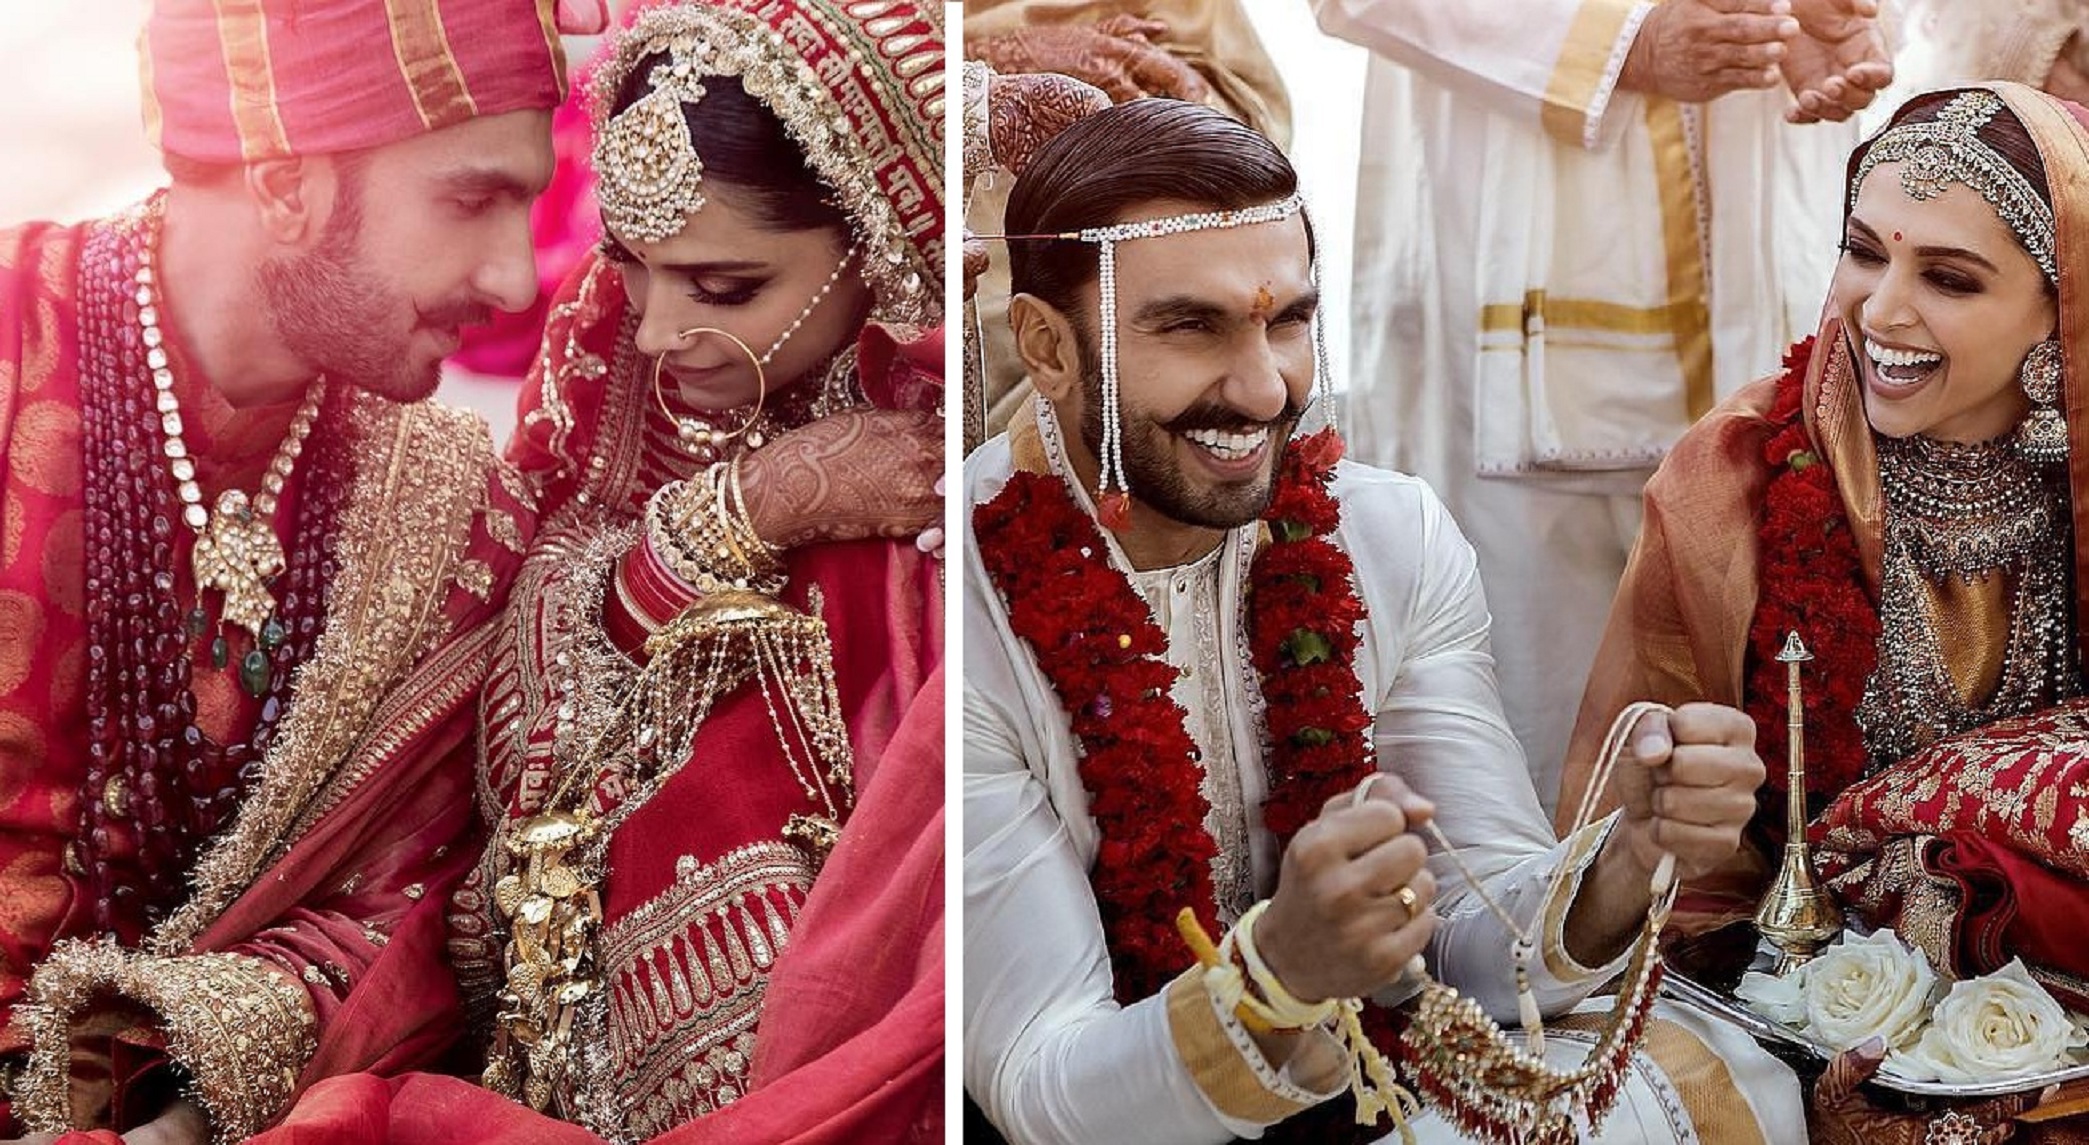 DeepVeer Wedding: The First Official Pictures Are Finally Here and They’re Absolutely Beautiful